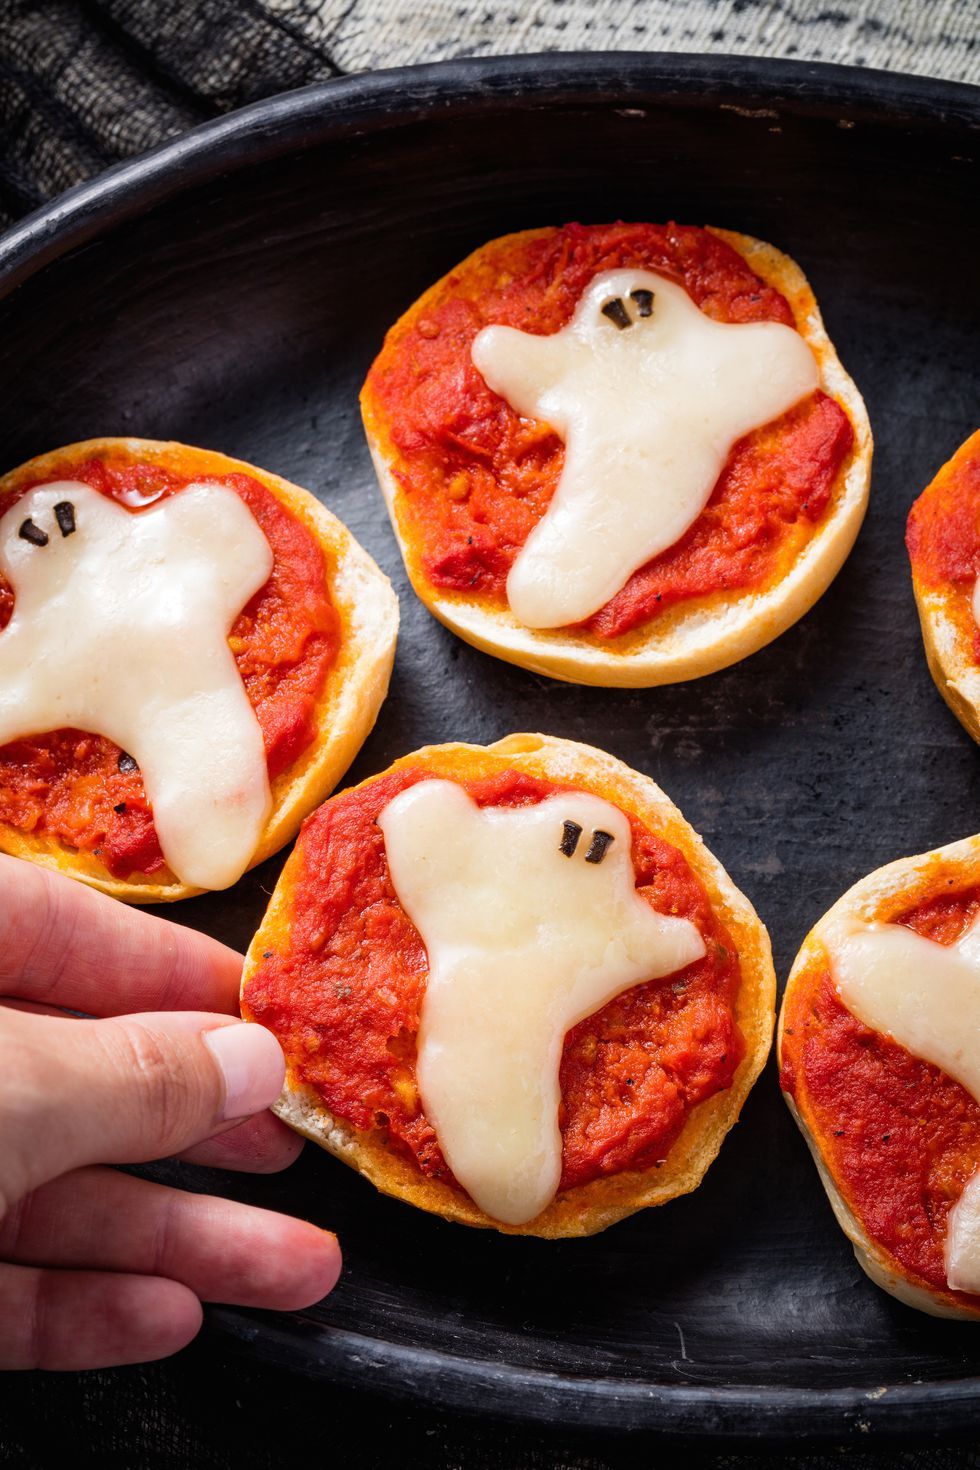 Ghost style pizza slices